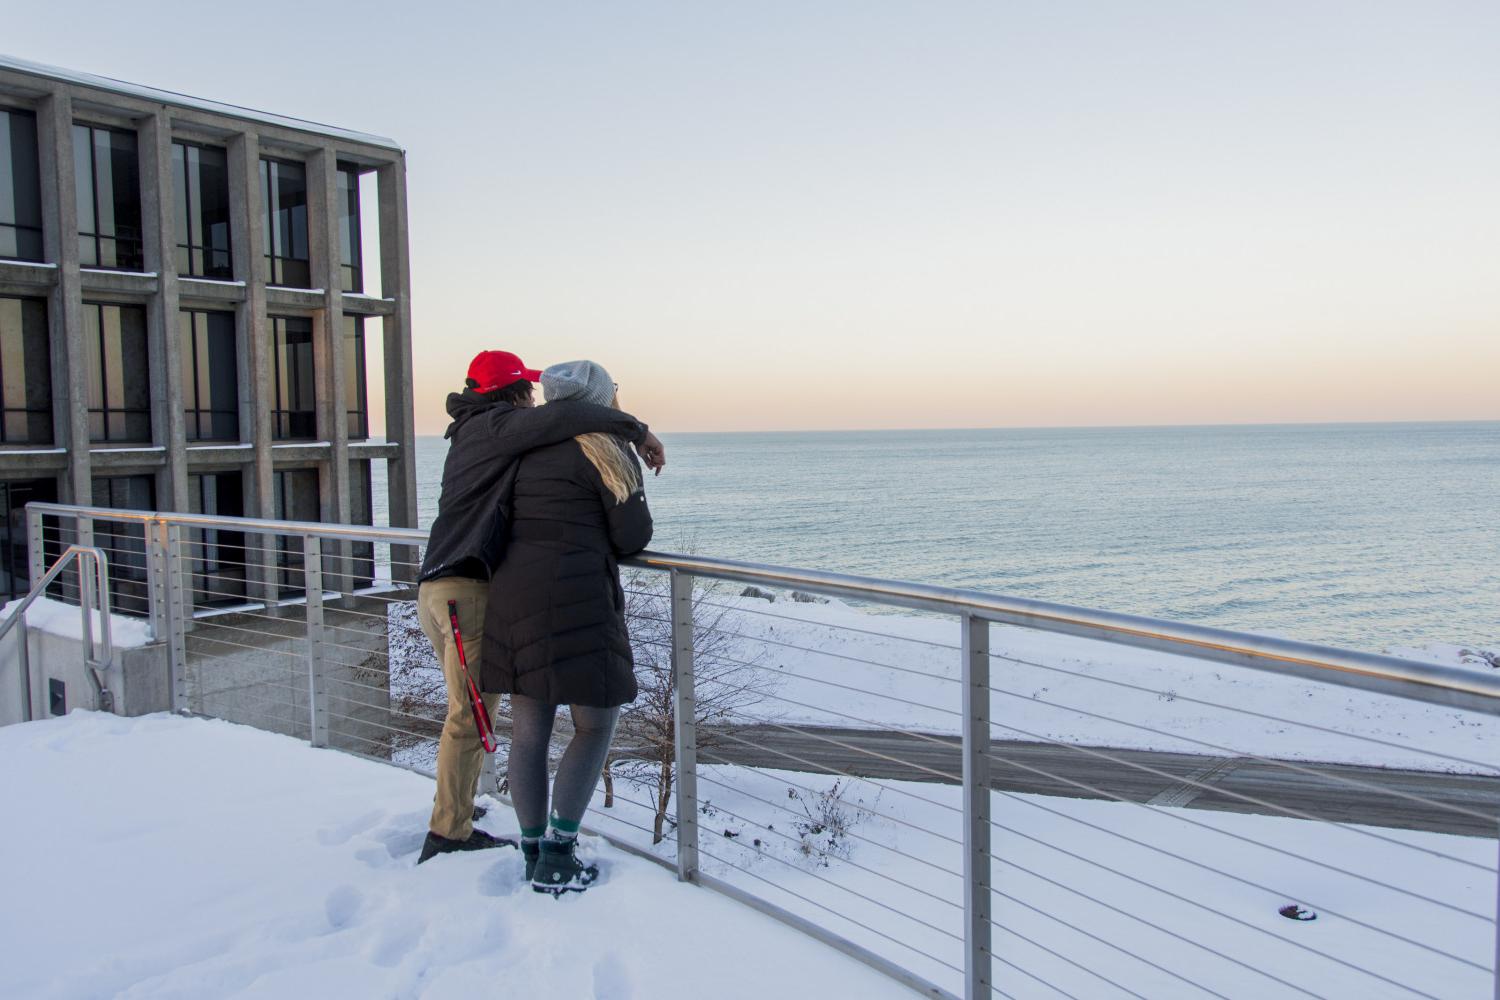 You may need to bundle up in winter, but the views are still breathtaking.